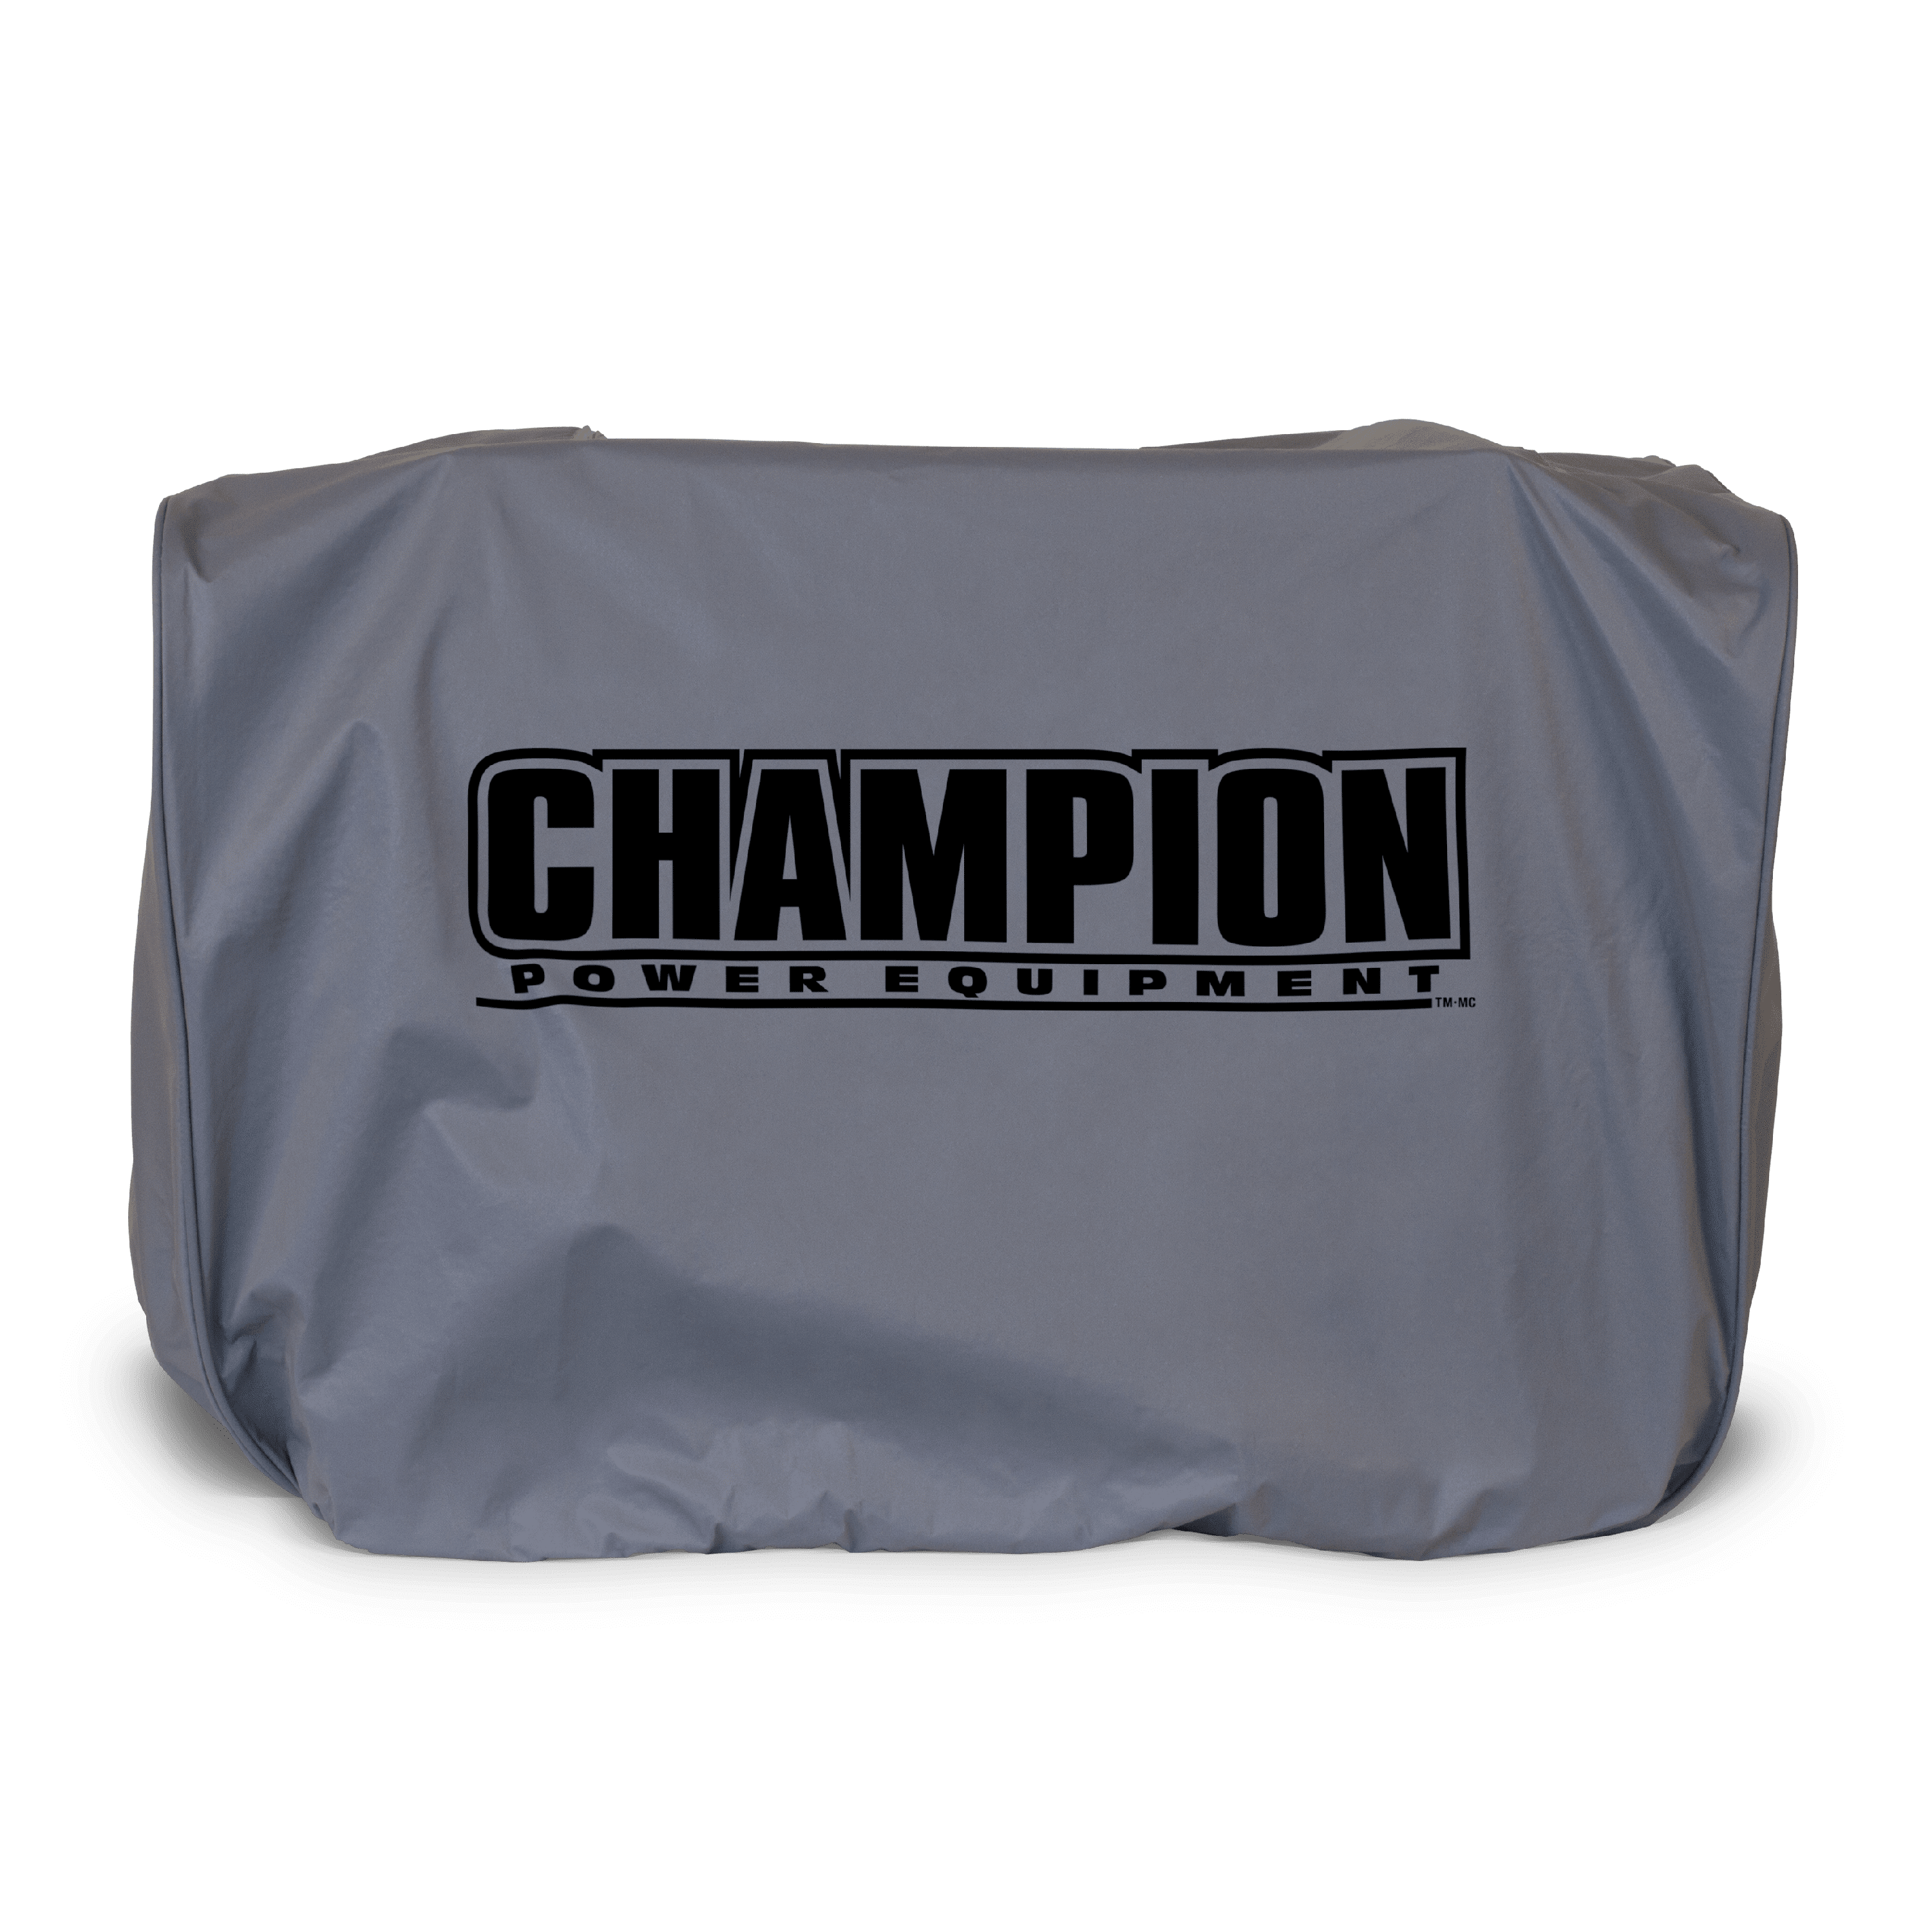 Generator Storage Cover For Champion Portable Weather-Resistant Dustproof 25" X 